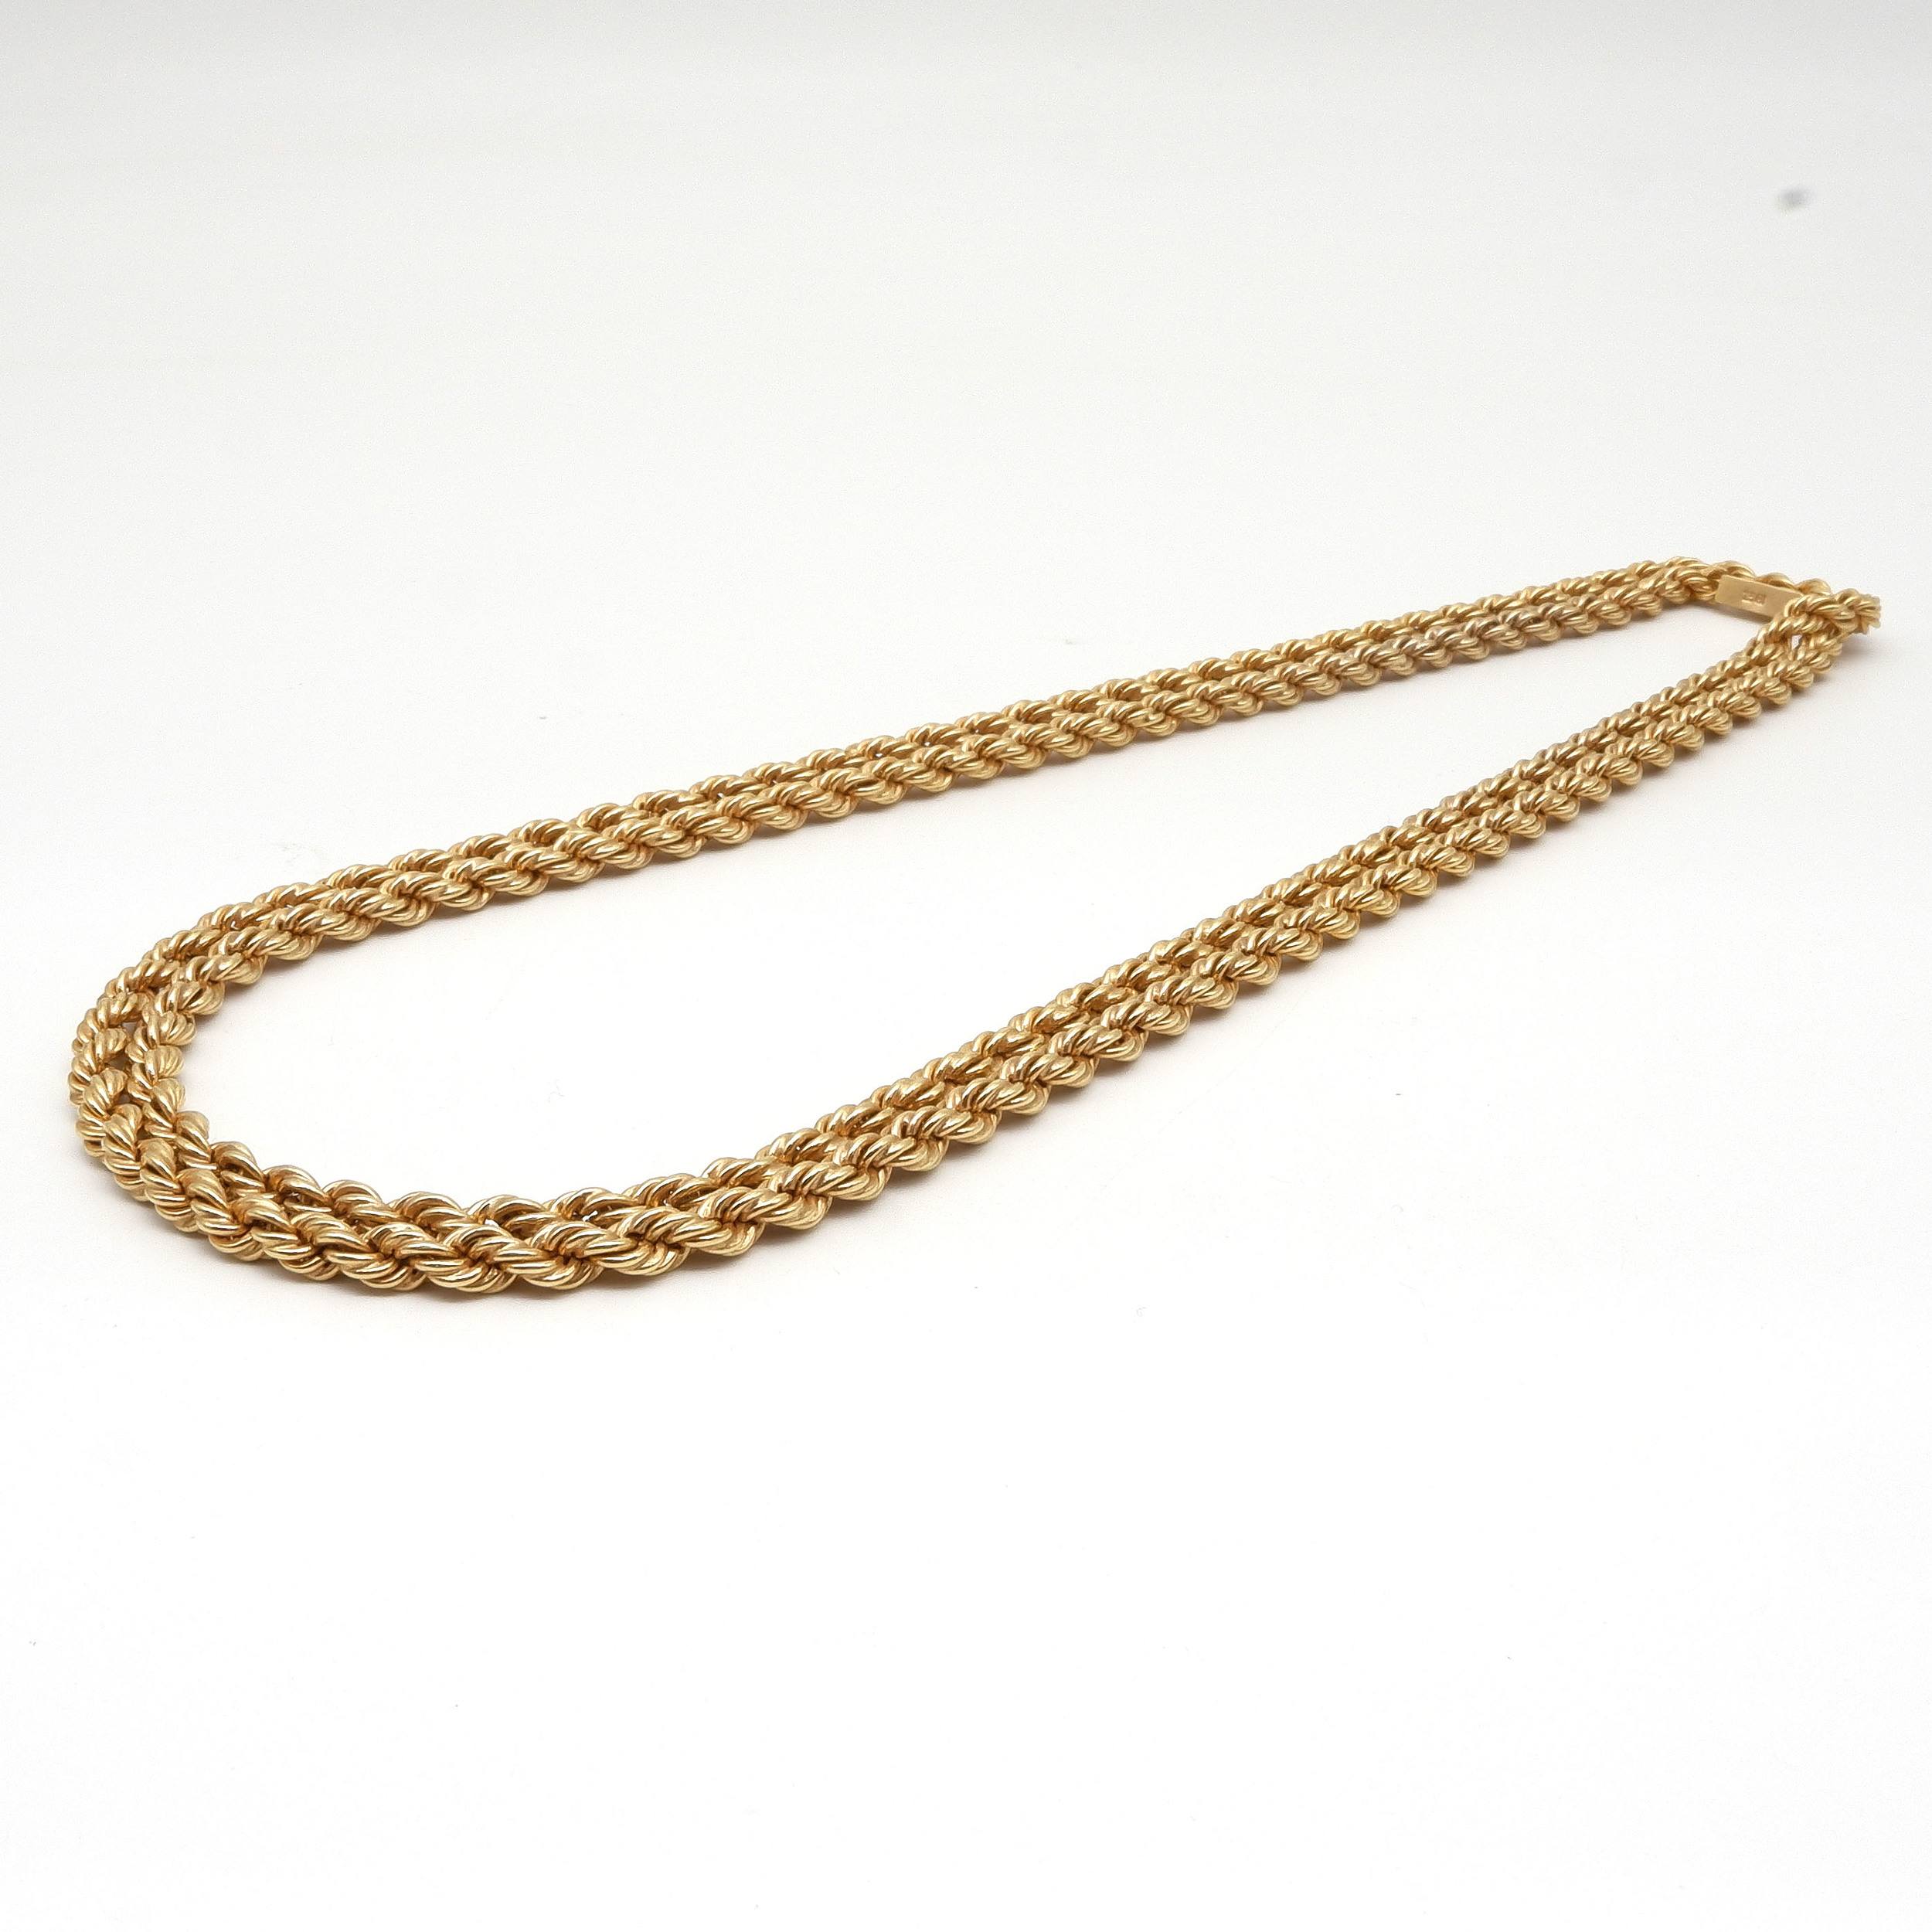 '18ct Yellow Gold Triple Rope Chain, 44.7g'